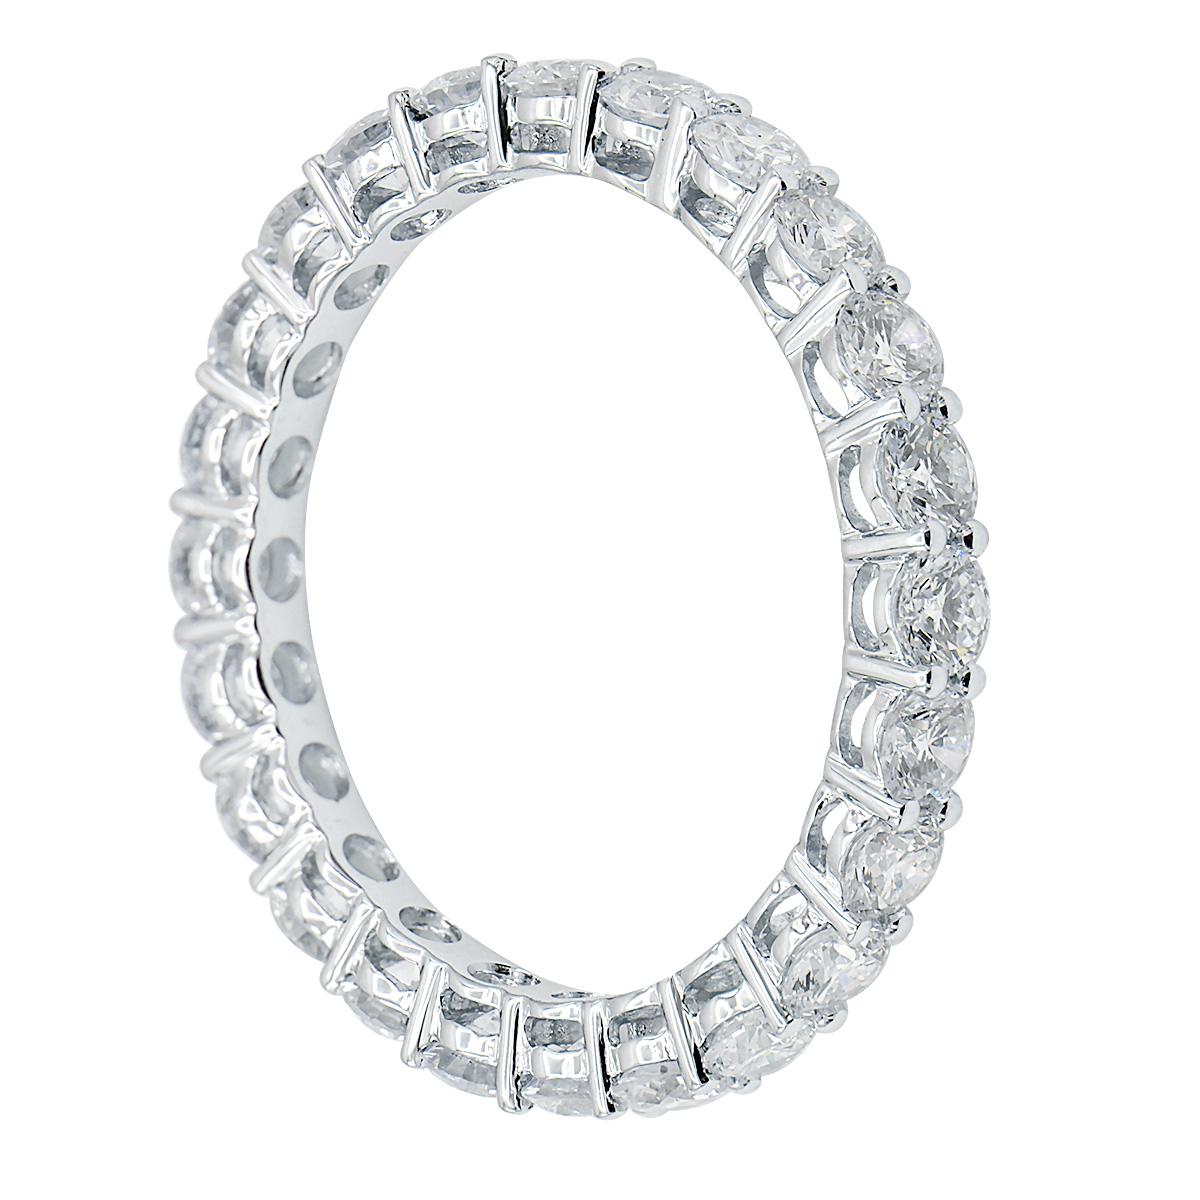 This gorgeous classic eternity band is perfect for everyone. This ring is made from 1.7 grams of 18 karat white gold. 23 beautiful VS2, G color diamonds totaling 1.85 carats are set all the way around the band for the perfect balance of gold to